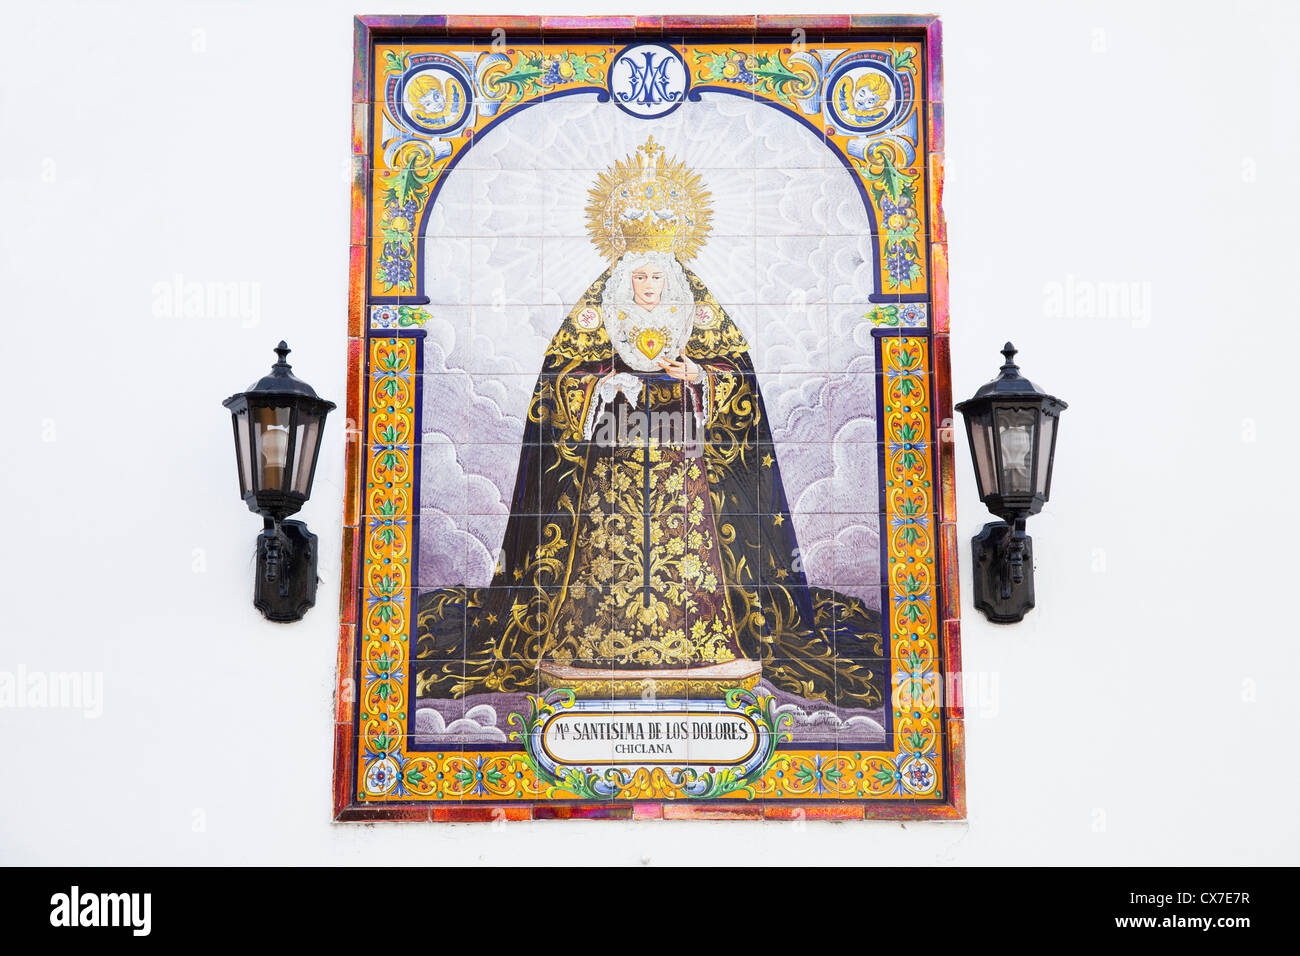 A Religious Figure On Tile On A White Wall With Mounted Lights; Chiclana De La Frontera, Andalusia, Spain Stock Photo